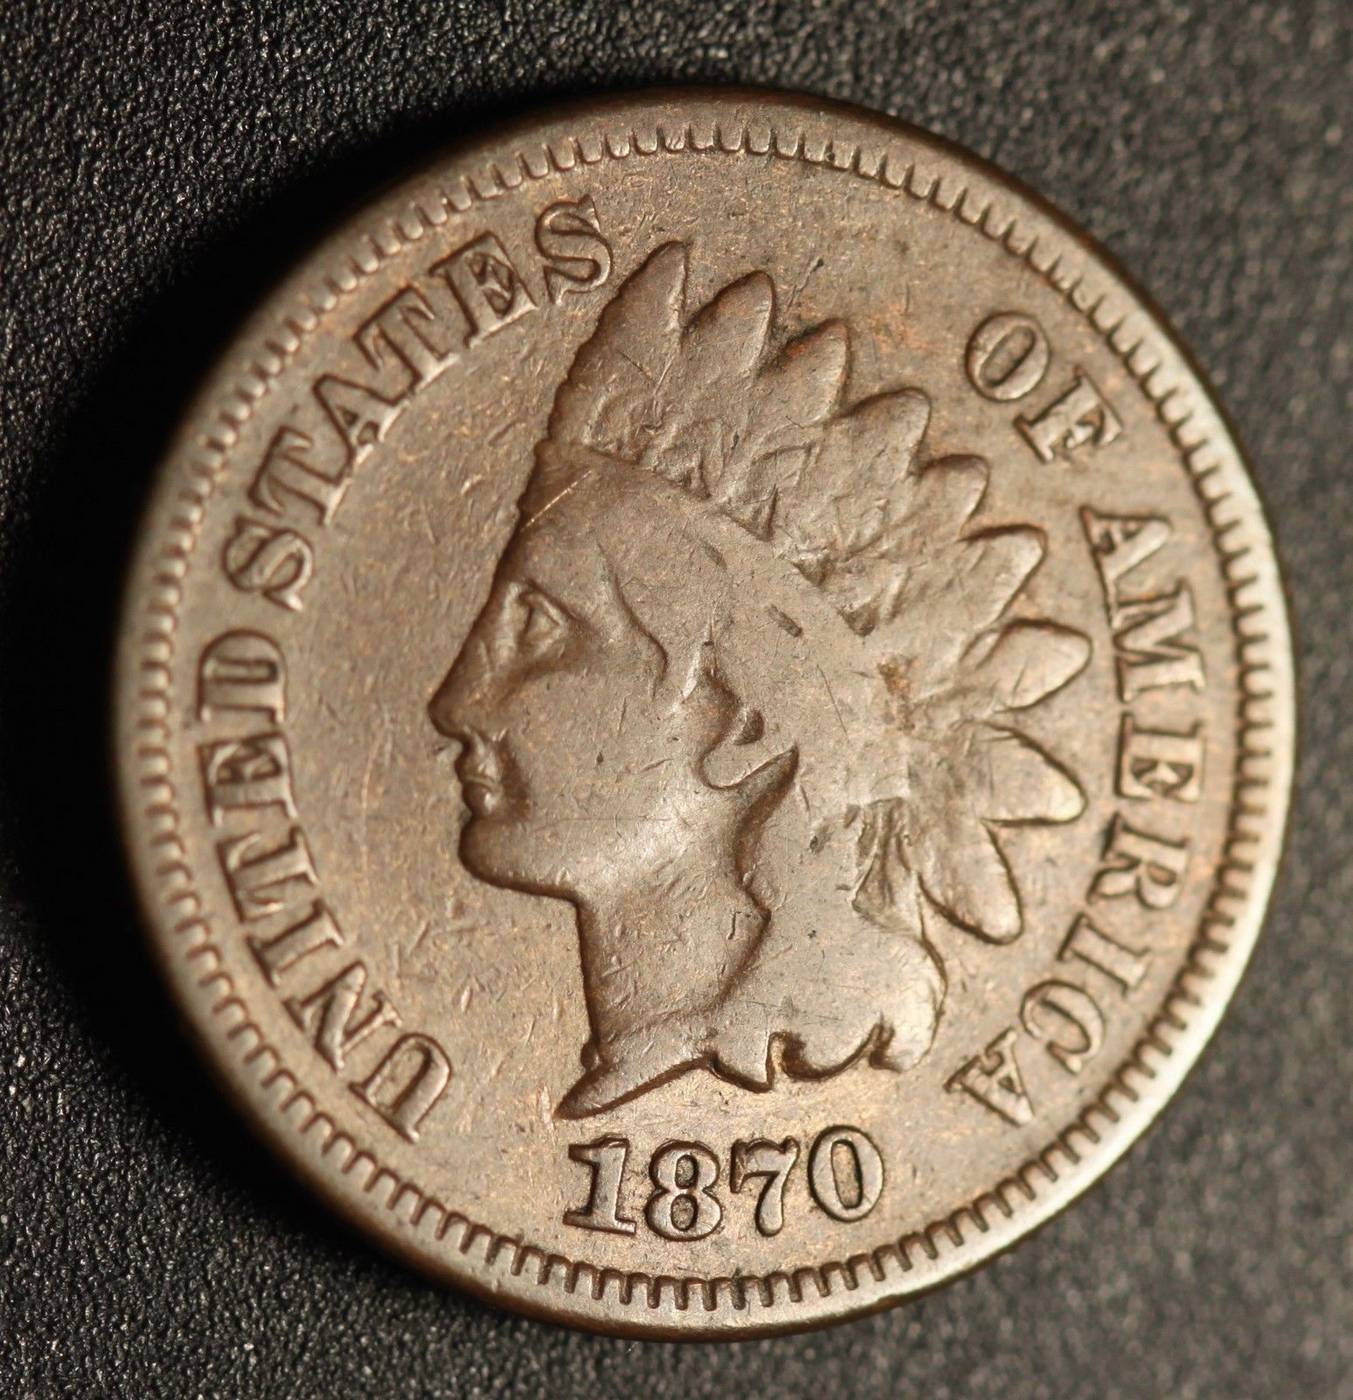 1870 - RPD-006 - Indian Head Penny - Photo by Ed Nathanson